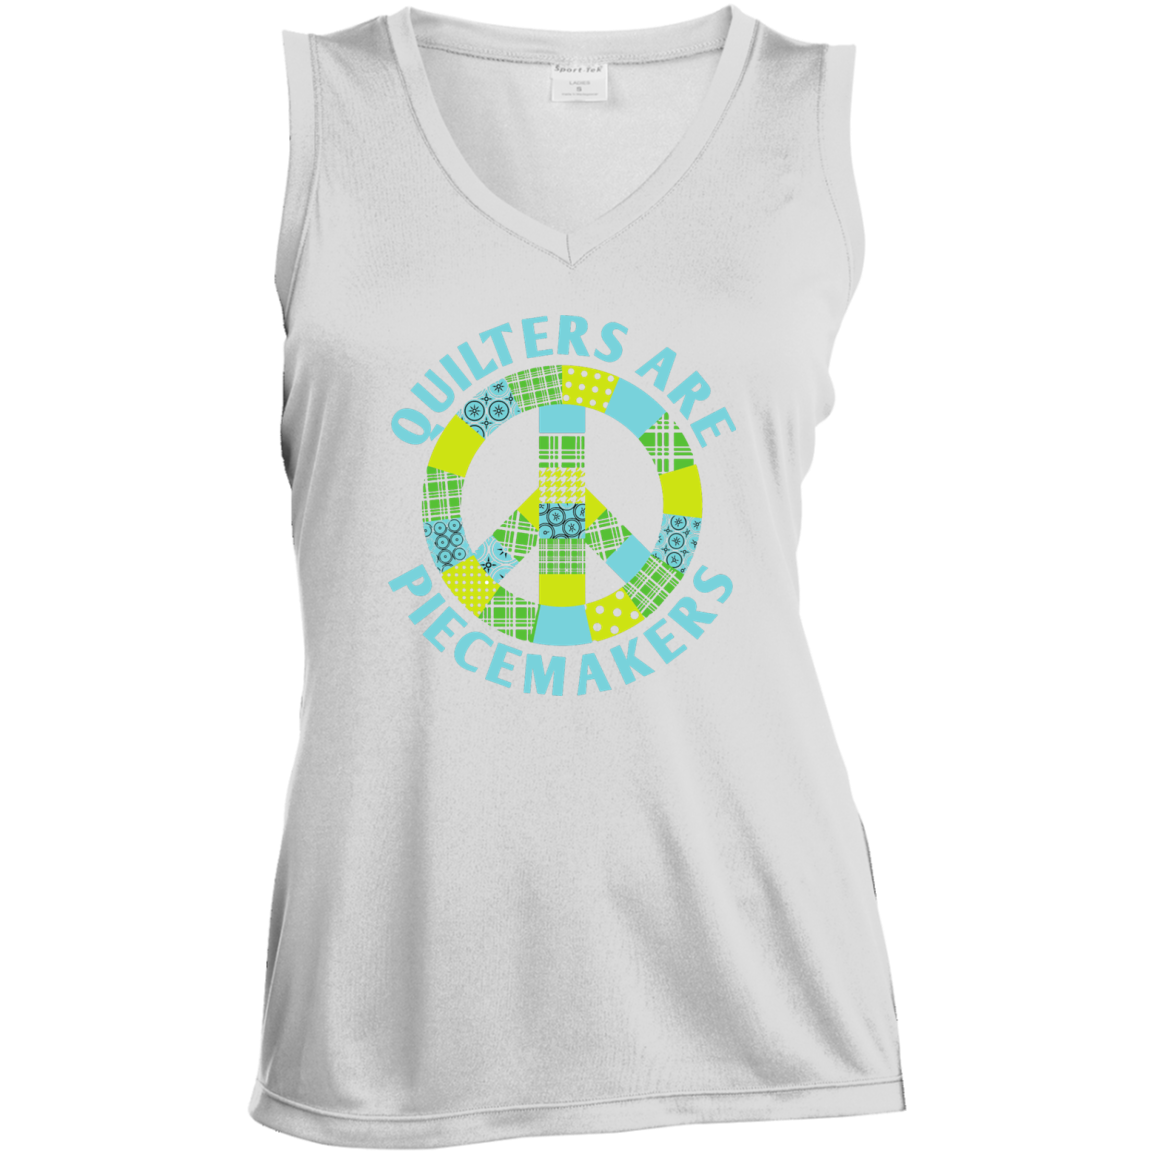 Quilters are Piecemakers Ladies Sleeveless V-Neck - Crafter4Life - 2